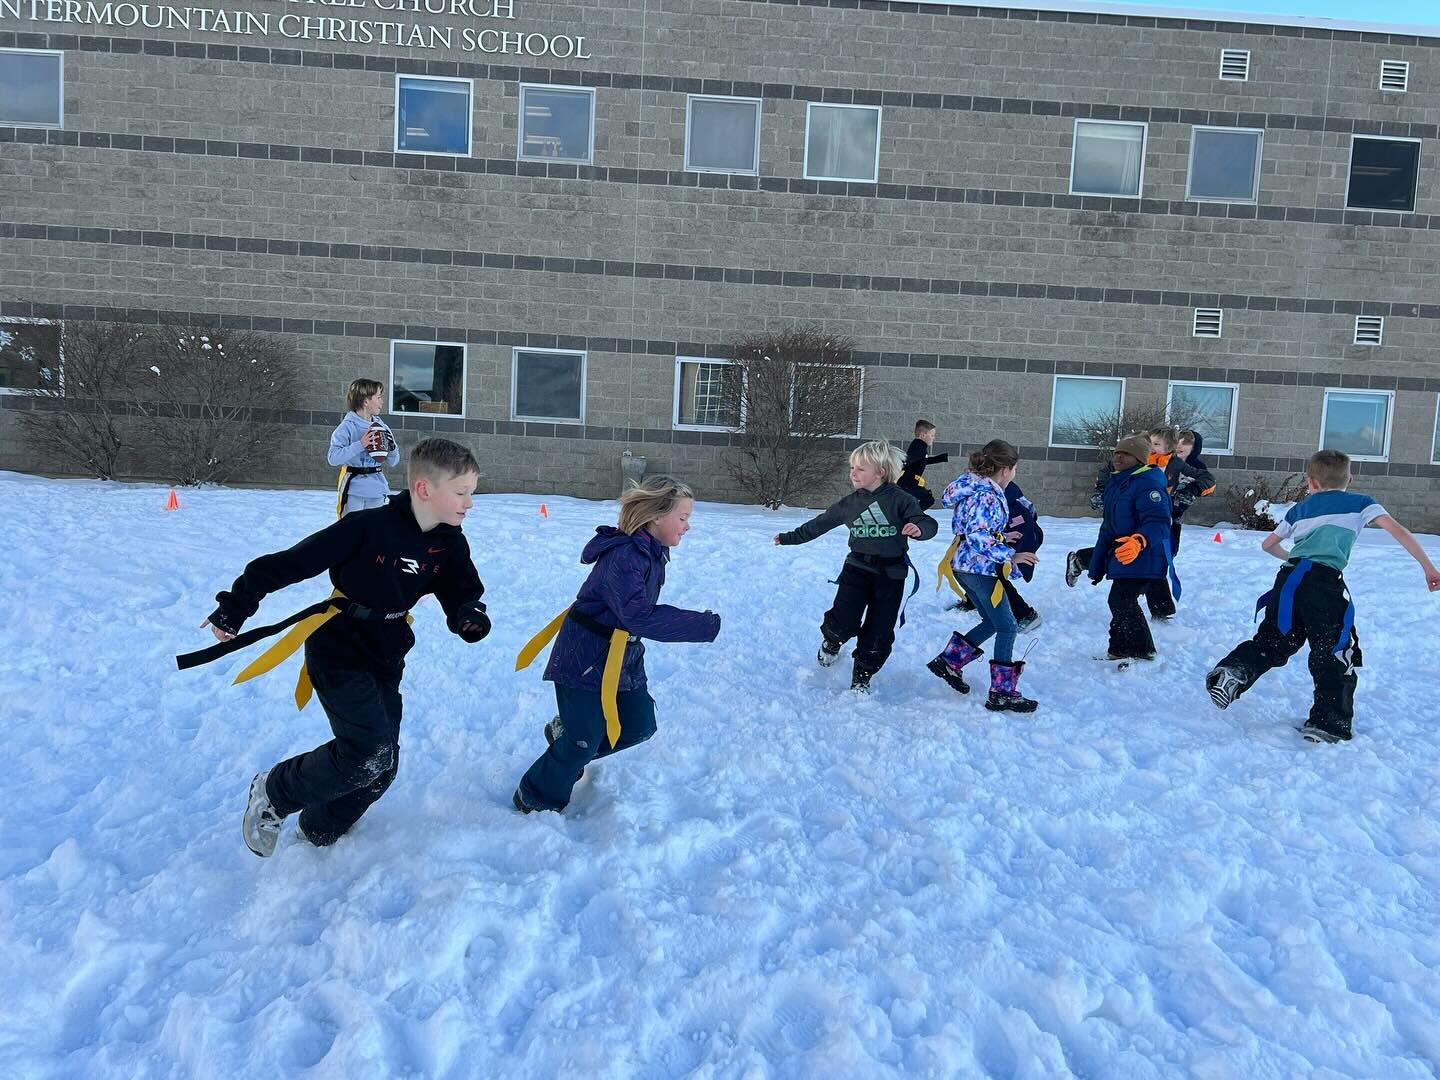 Our inaugural after school flag football club started yesterday. Our young athletes battled in the snow on the front lawn for each other&rsquo;s flags and for bragging rights! Thank you, Mr. Hobbs, for leading this elementary club! 🏈